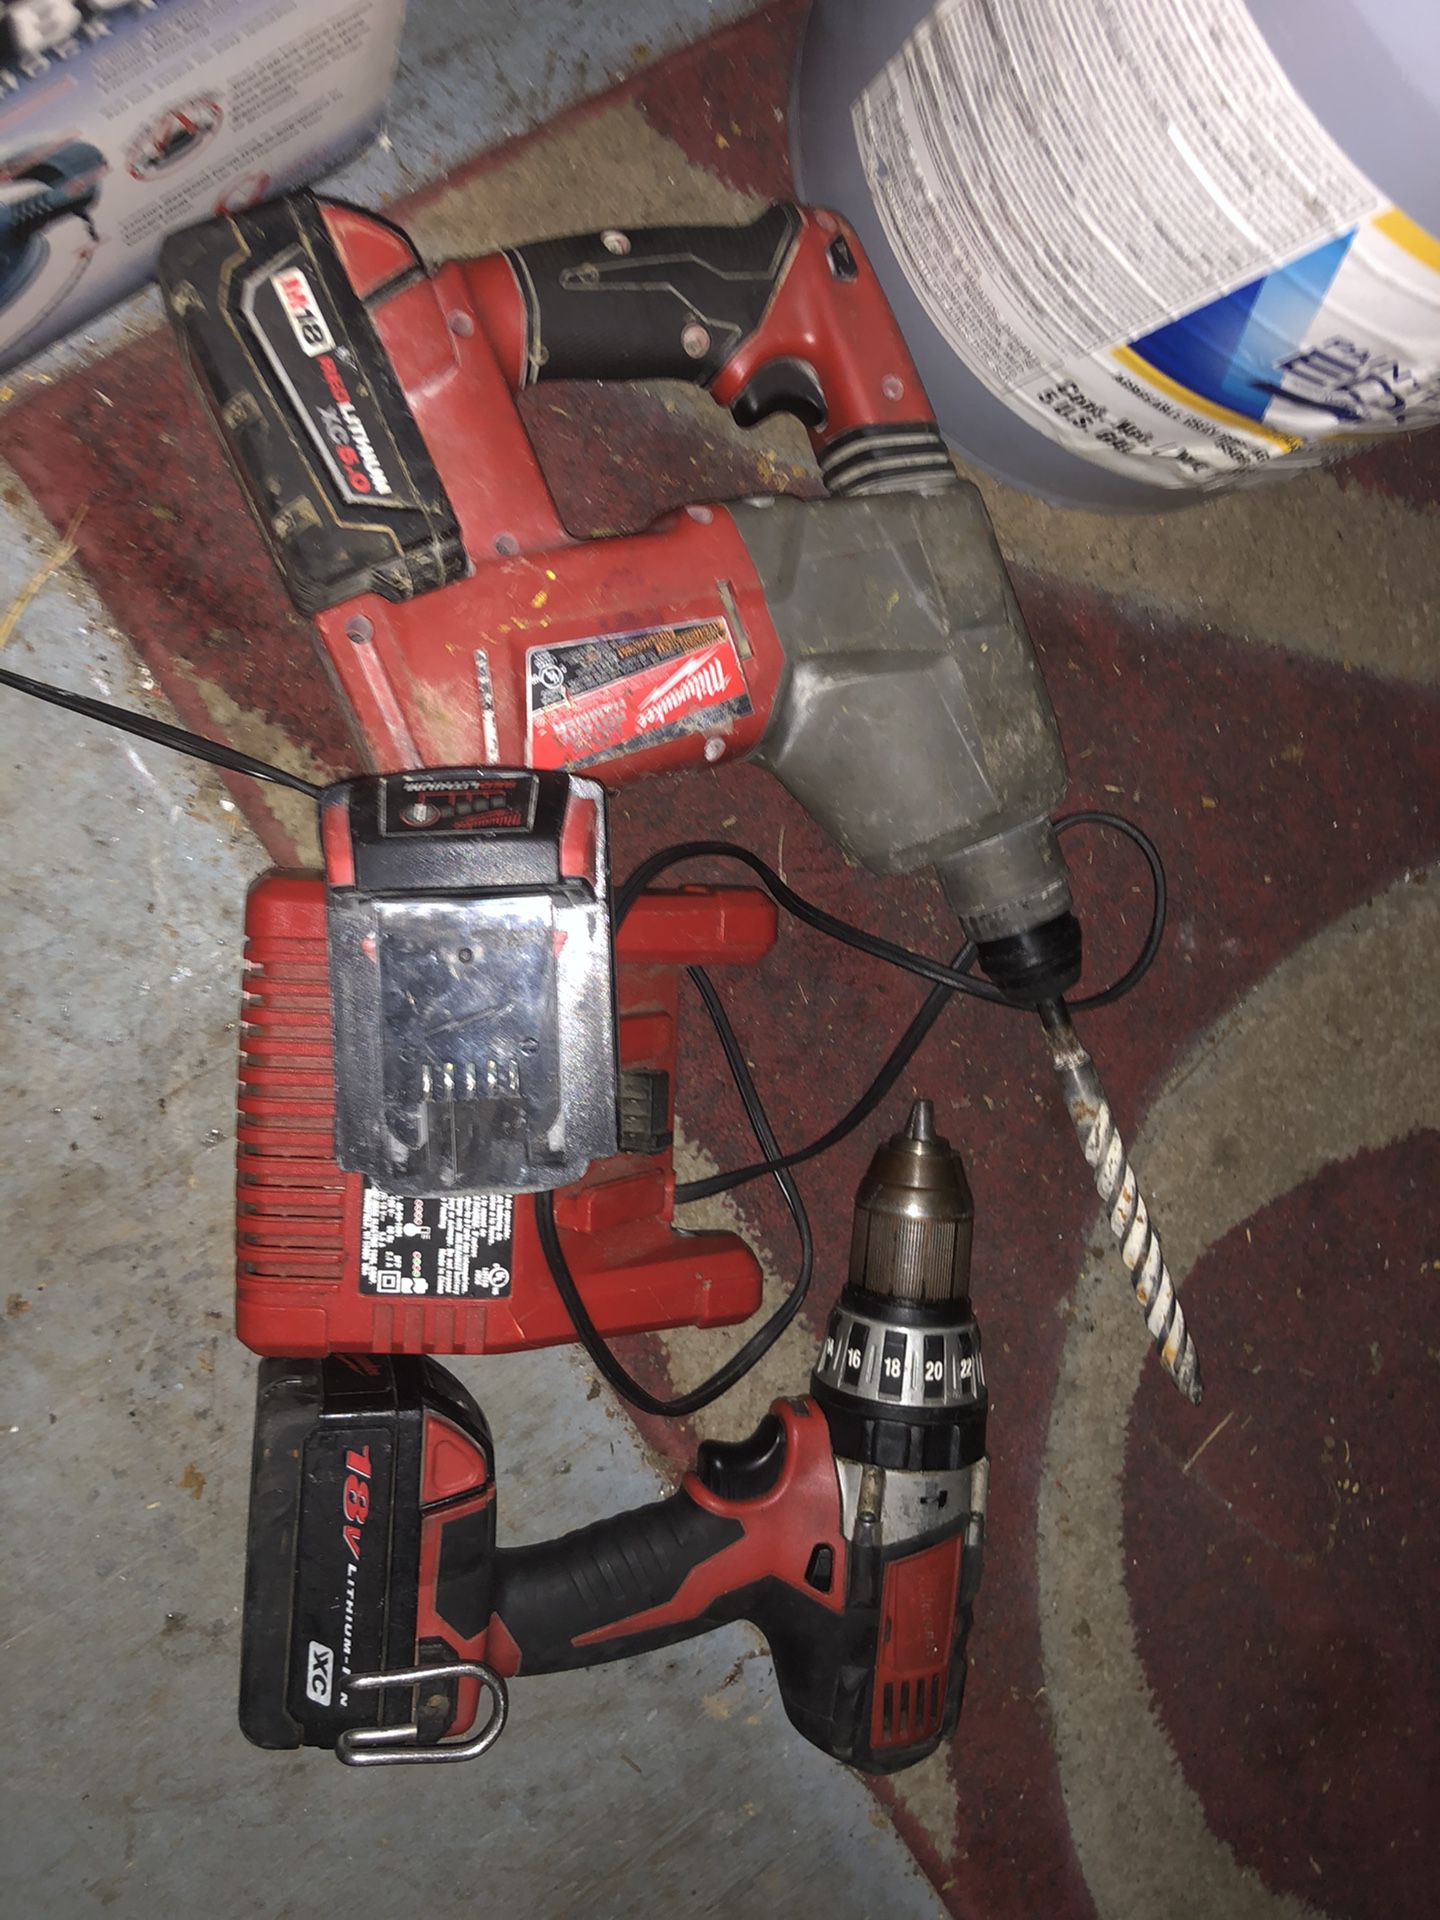 18 V Milwaukee Hammer drill and drill with charger